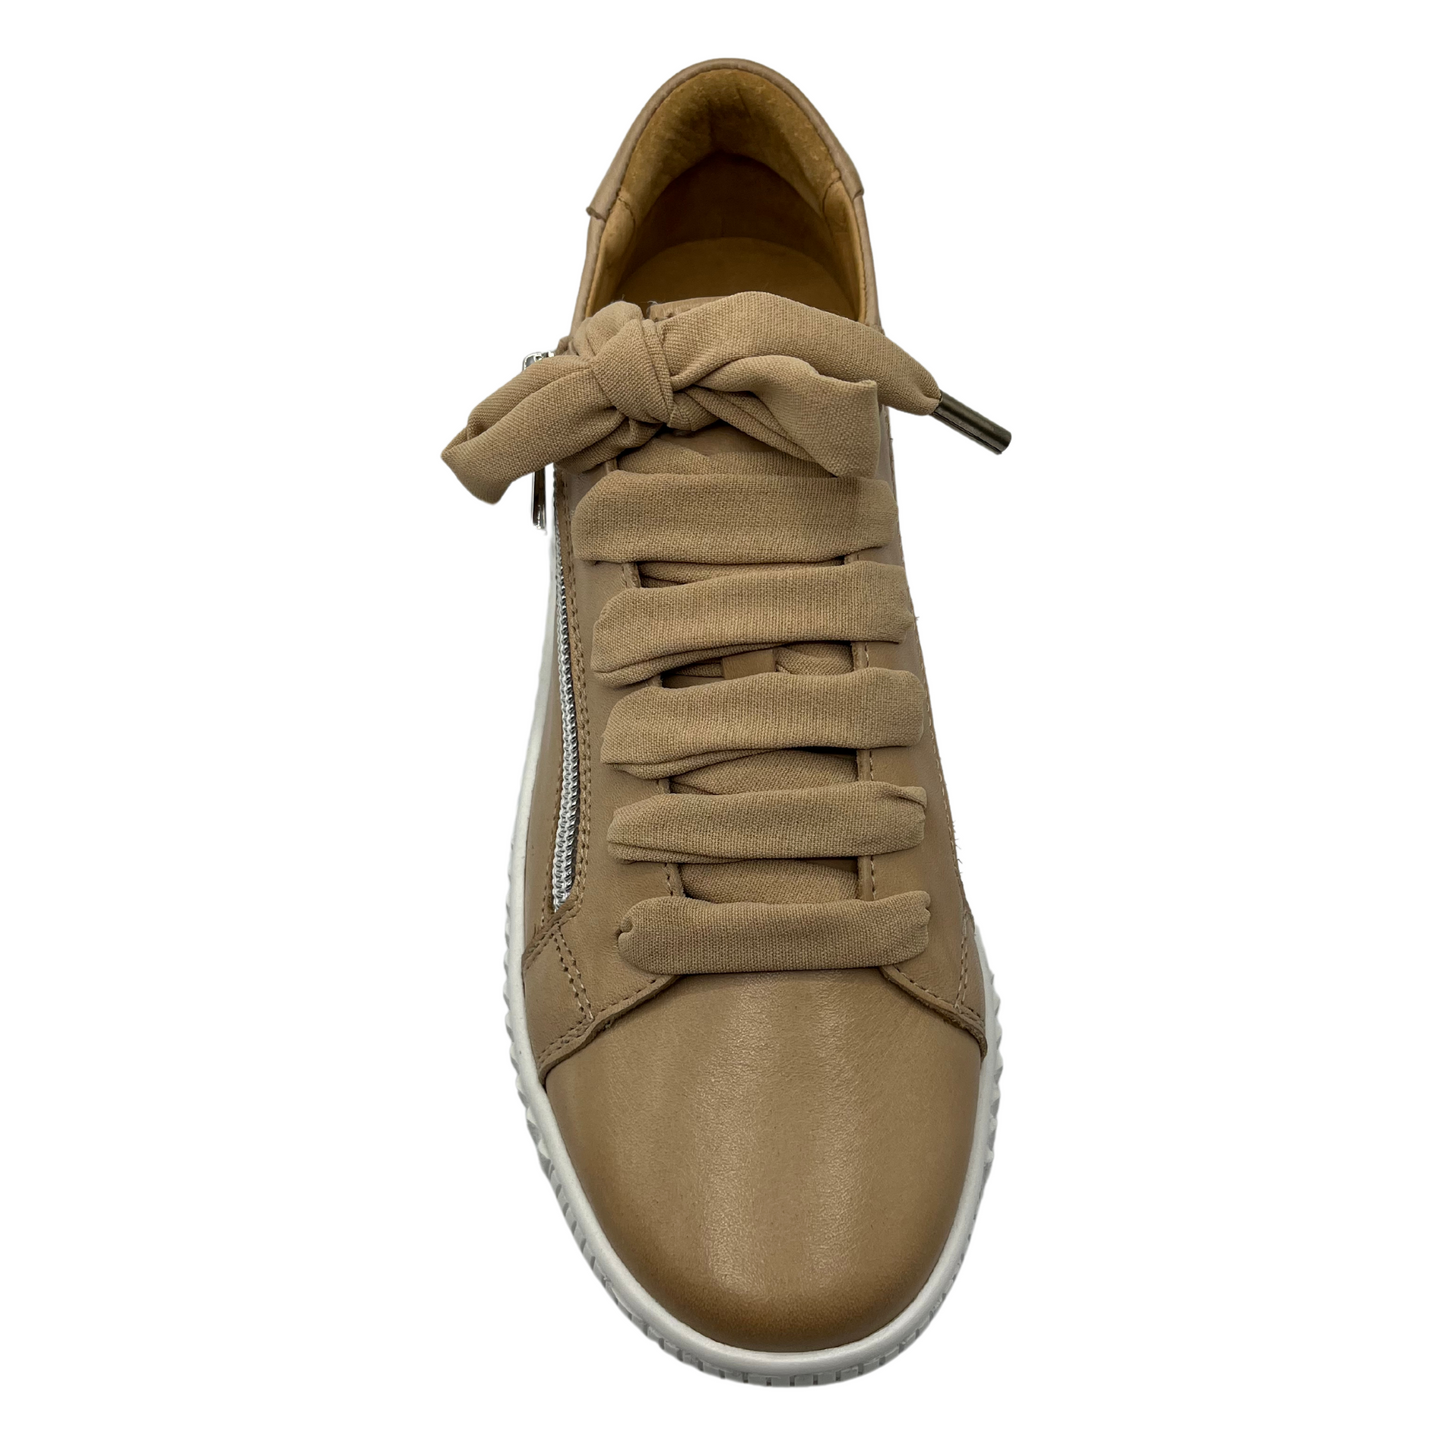 Top view of nude leather sneaker with matching laces and white rubber outsole